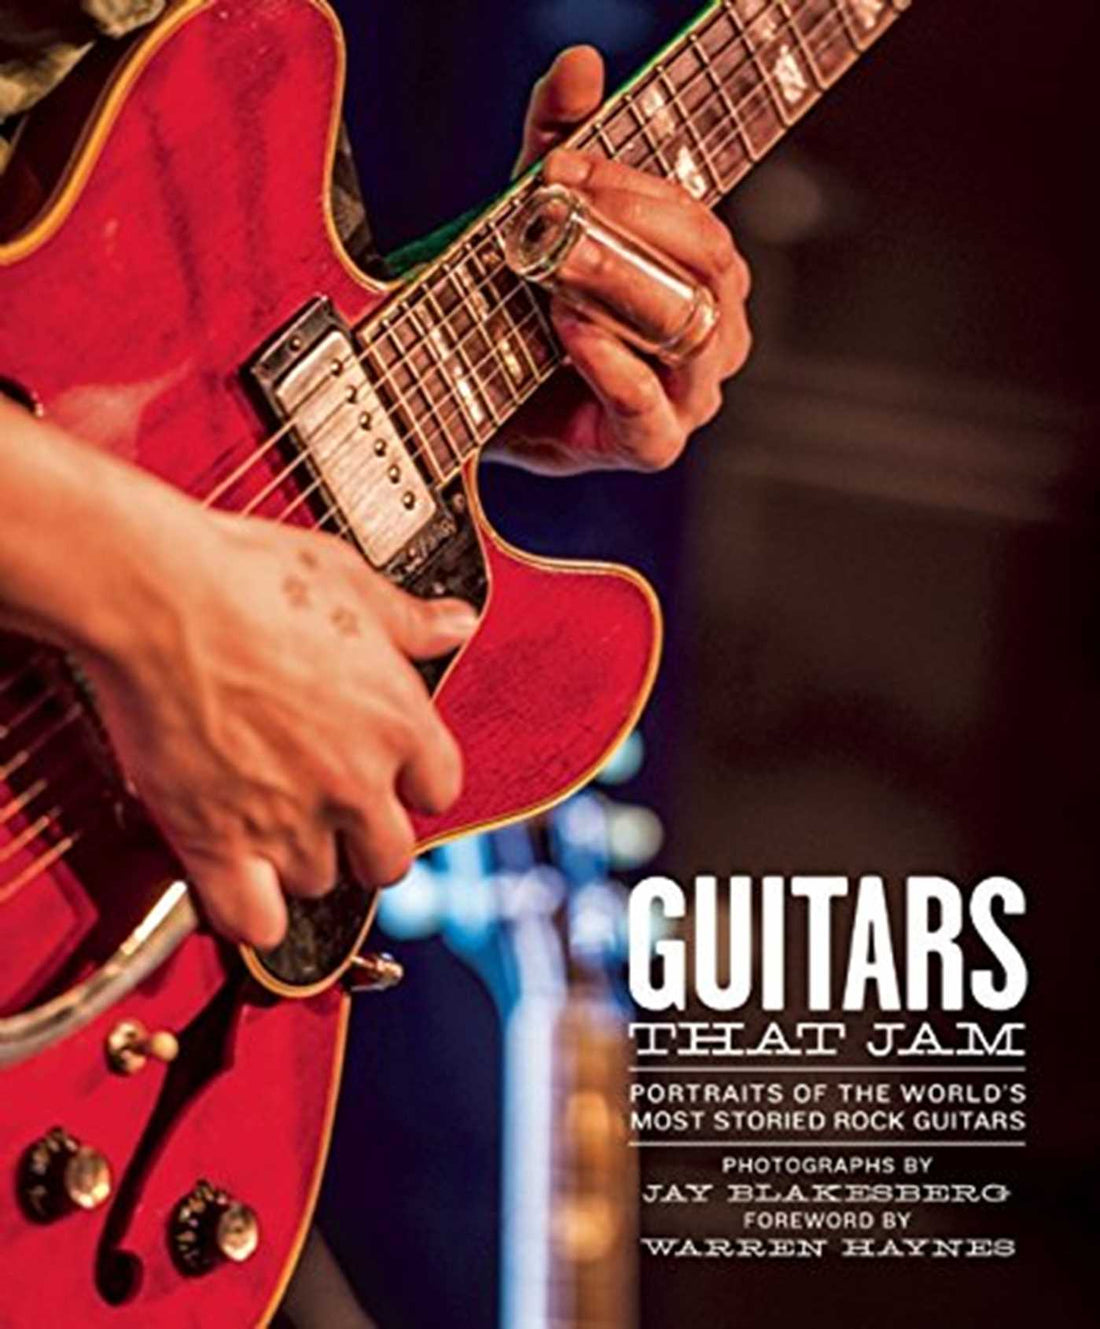 Guitars that Jam by Jay Blakesberg | Author Book Signing & Exhibition